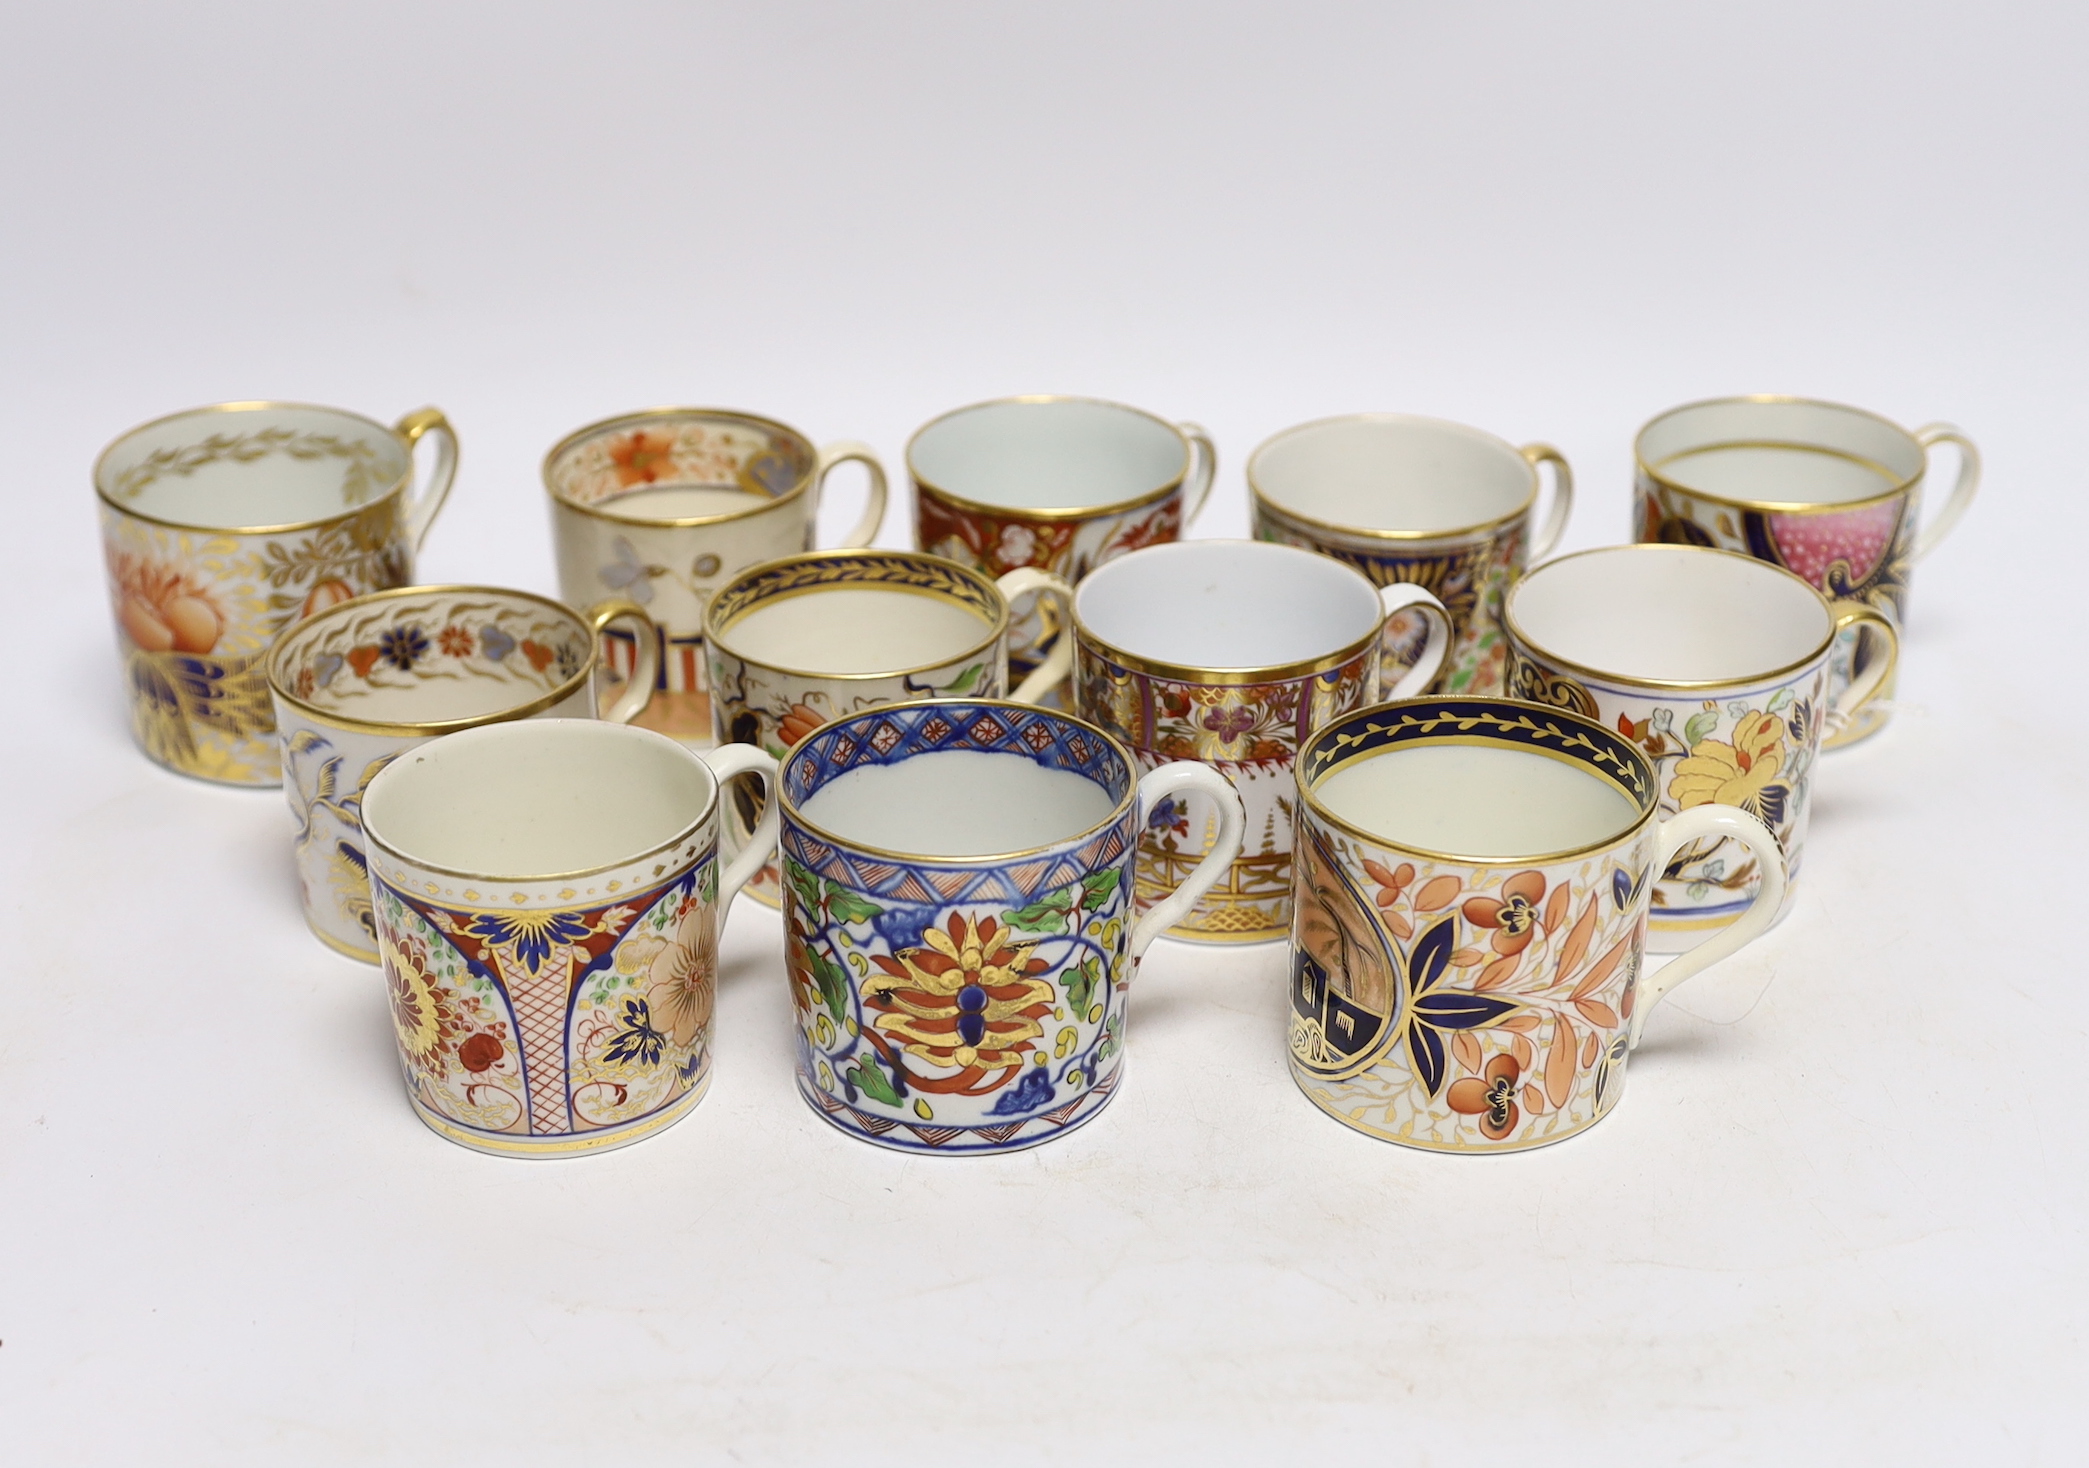 Twelve 1800-1820 English porcelain coffee cans, including Imari pattern examples                                                                                                                                            